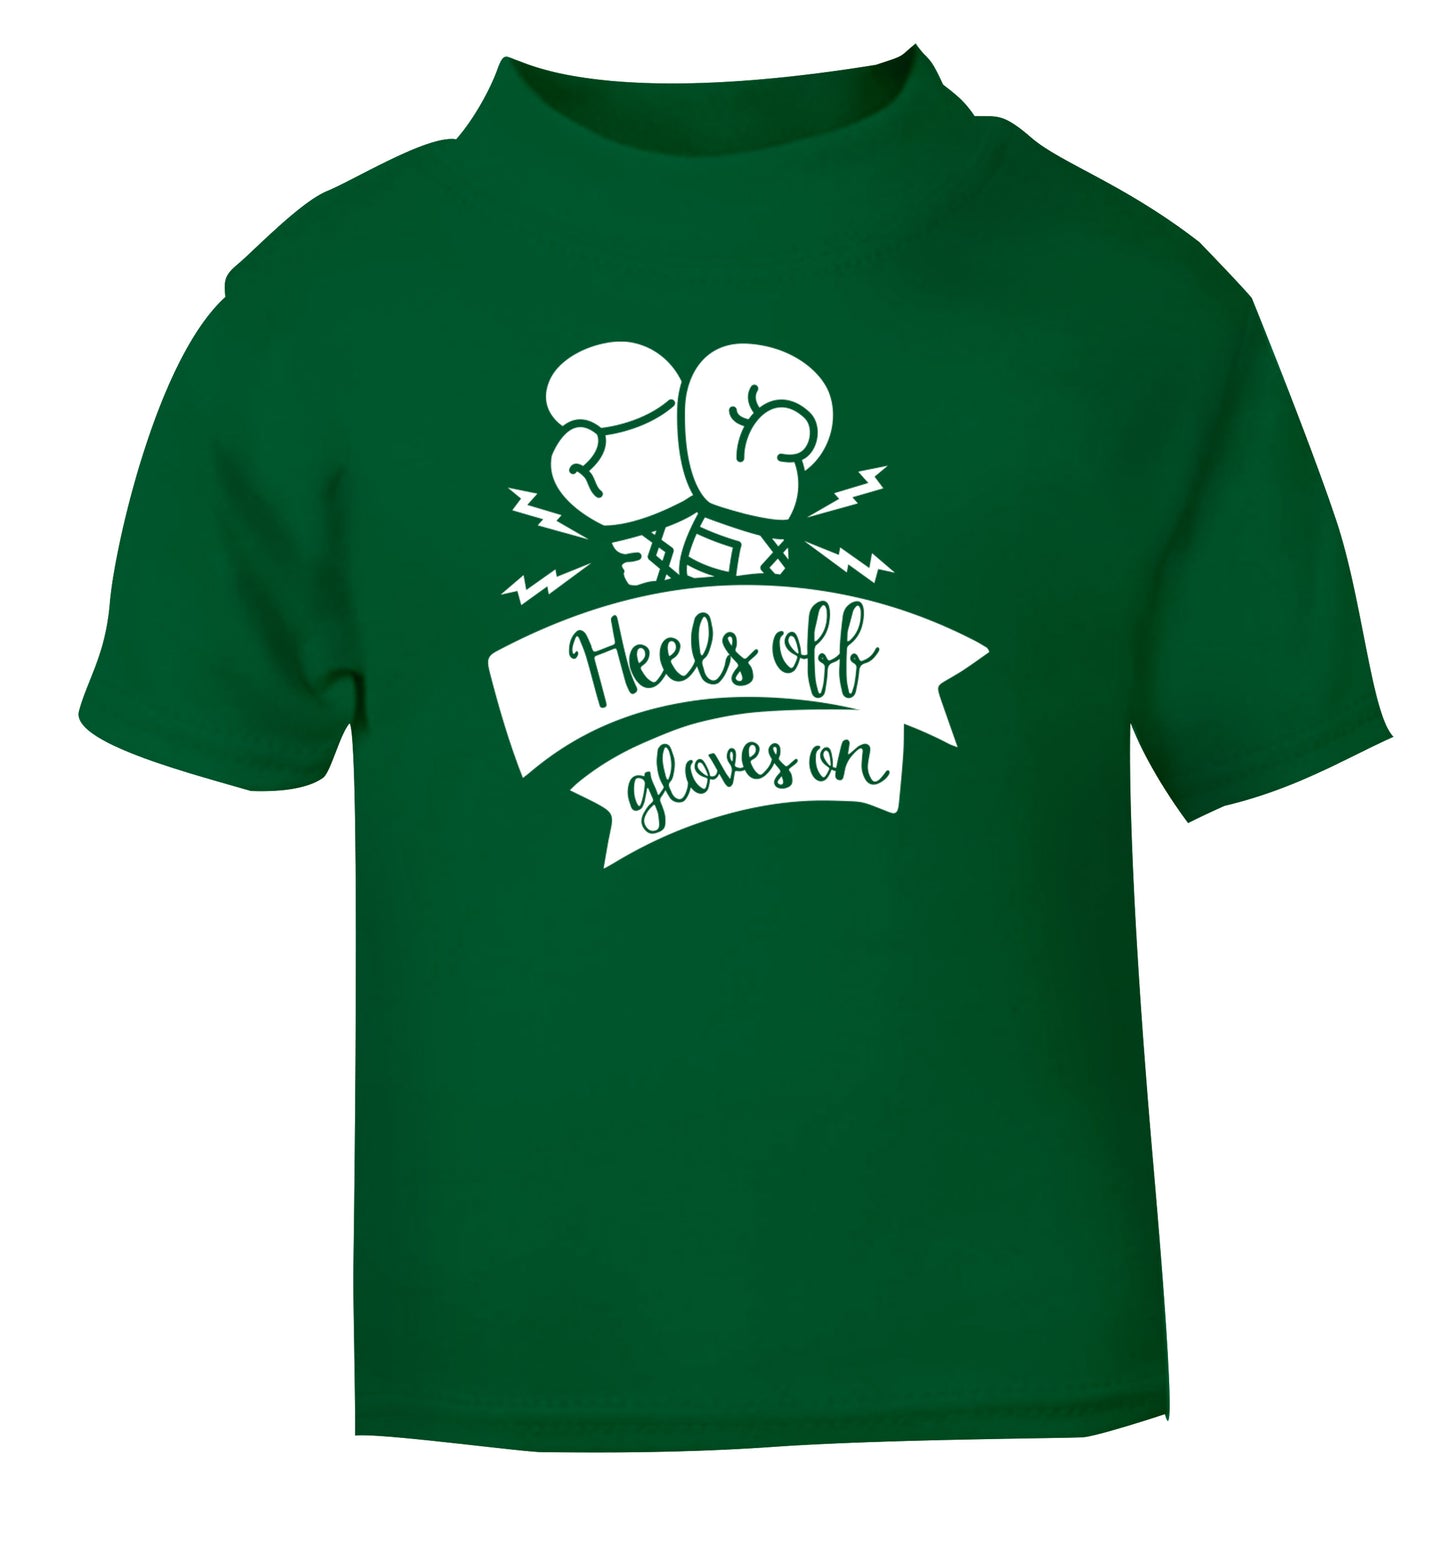 Heels off gloves on green Baby Toddler Tshirt 2 Years